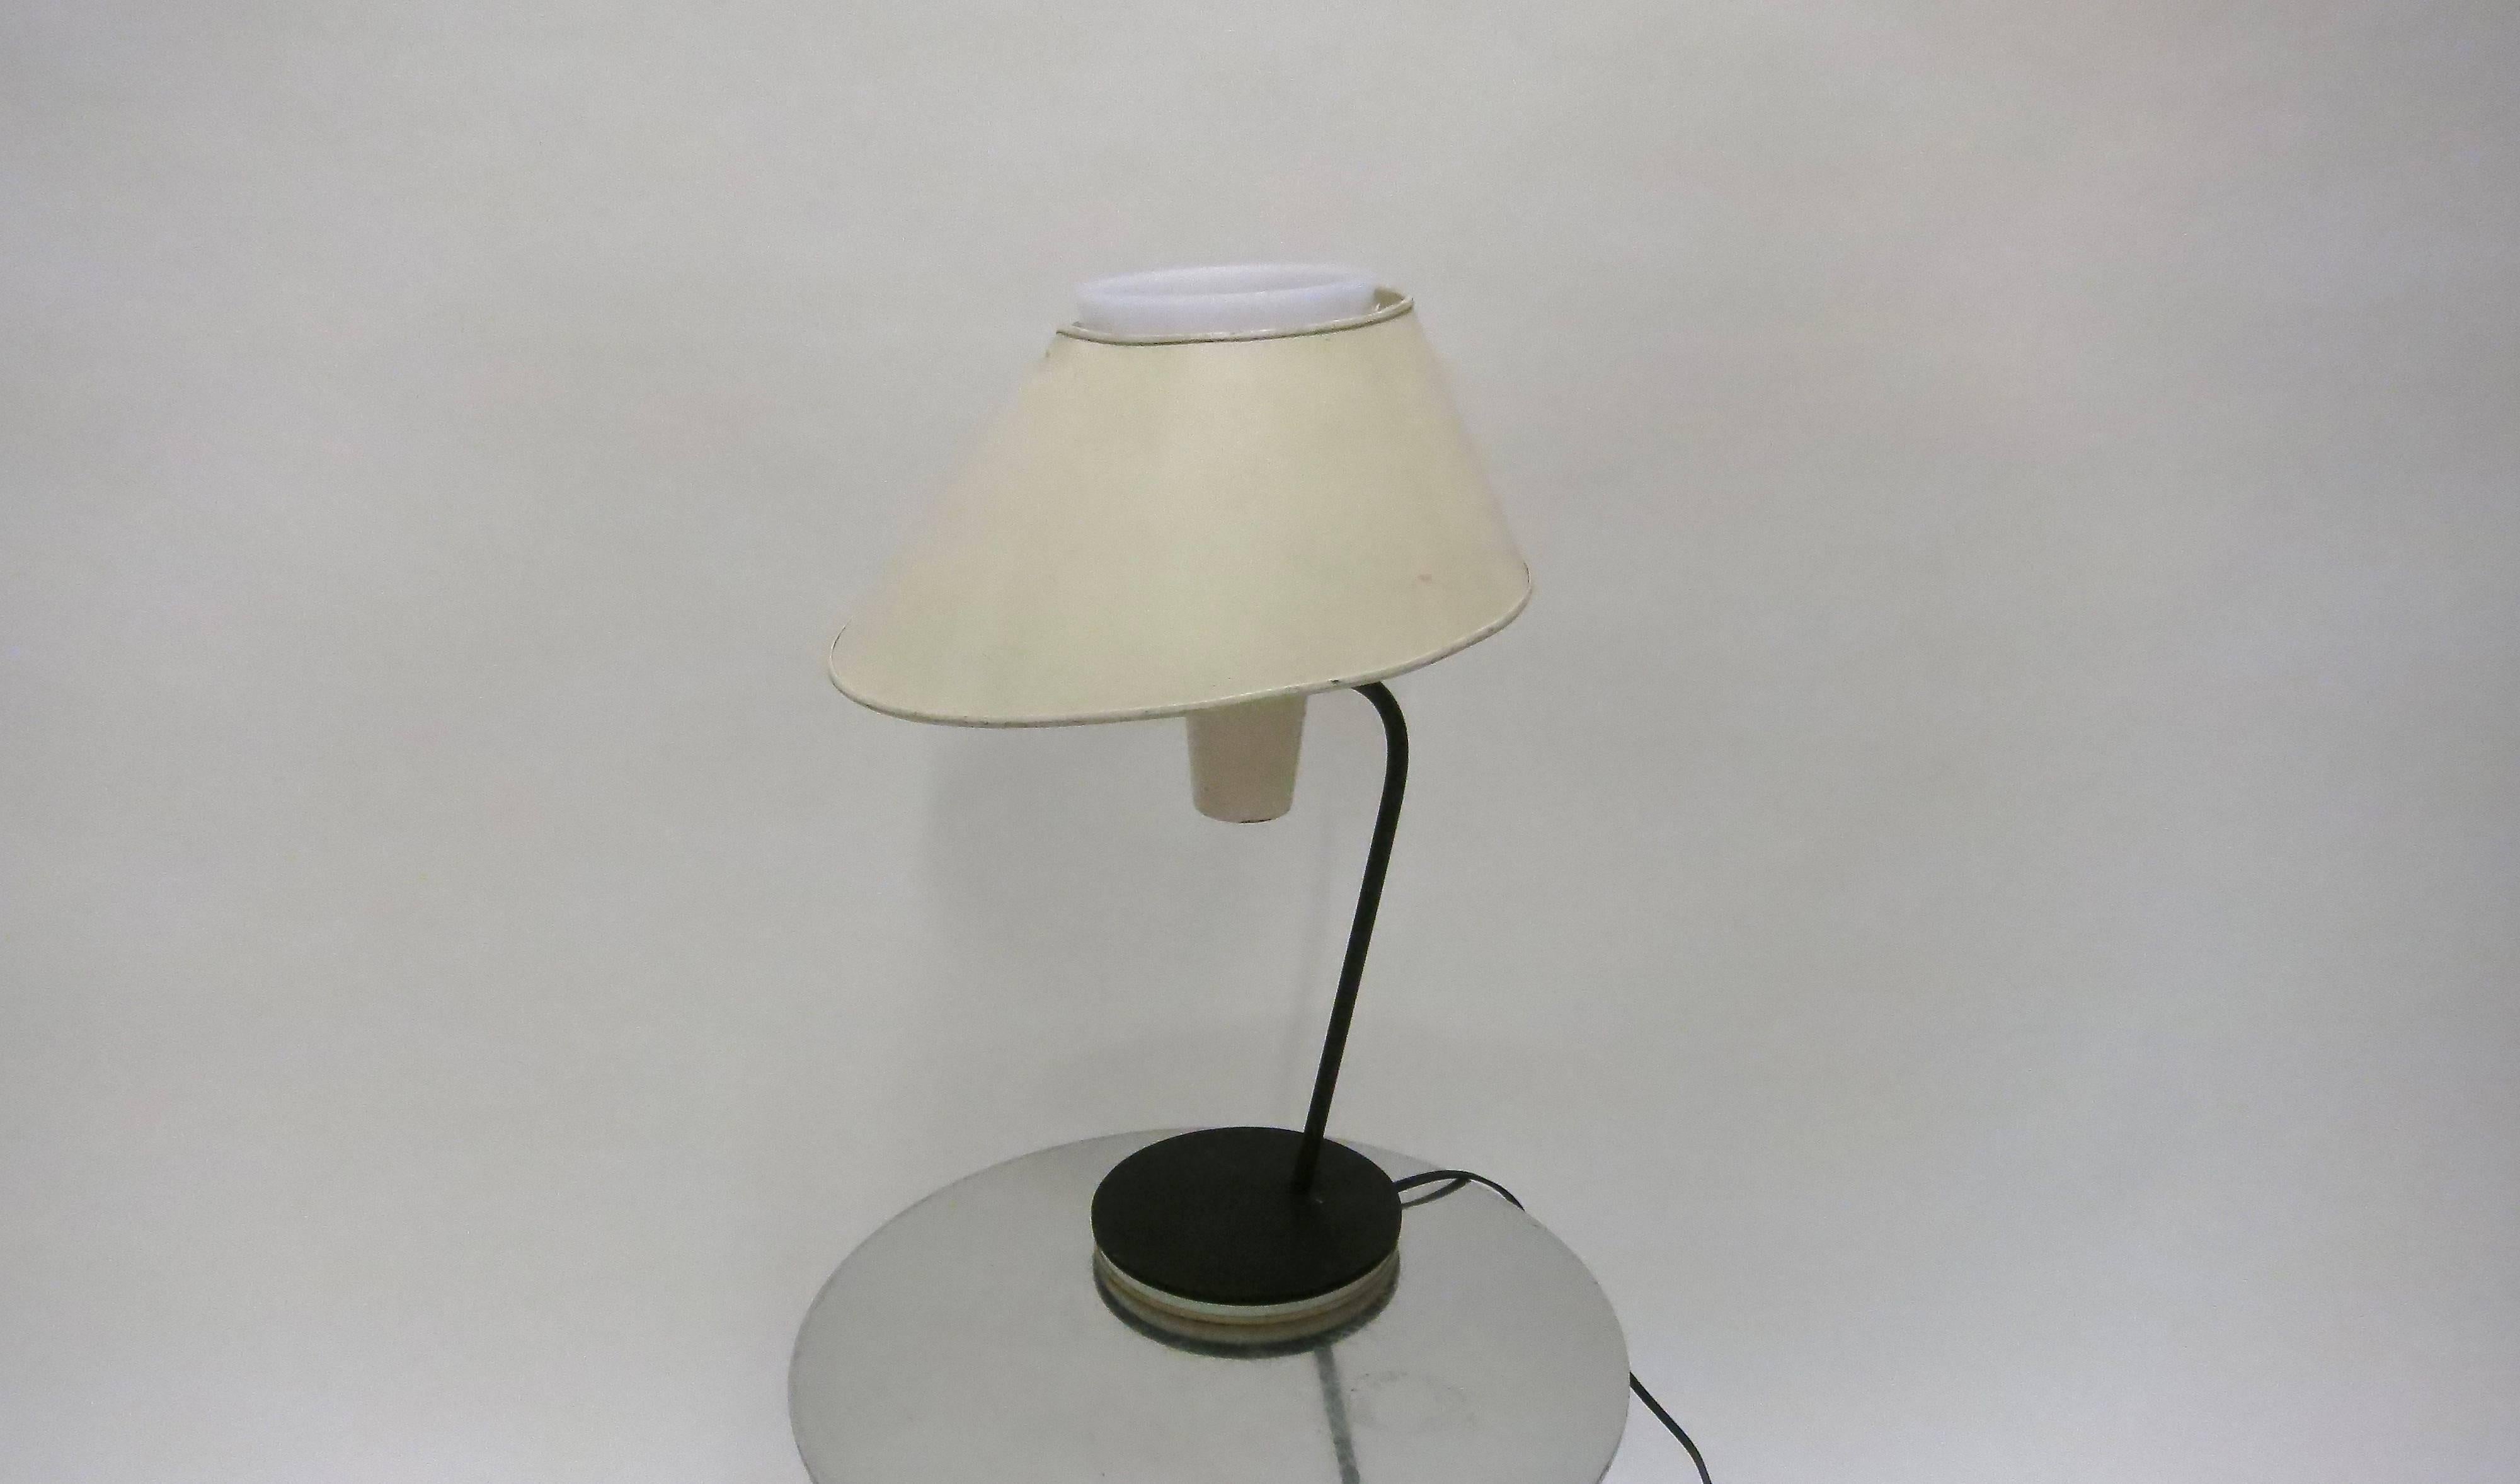 French Desk Lamp by Boris Jean Lacroix for Cité Universitaire, 1950s Made in France